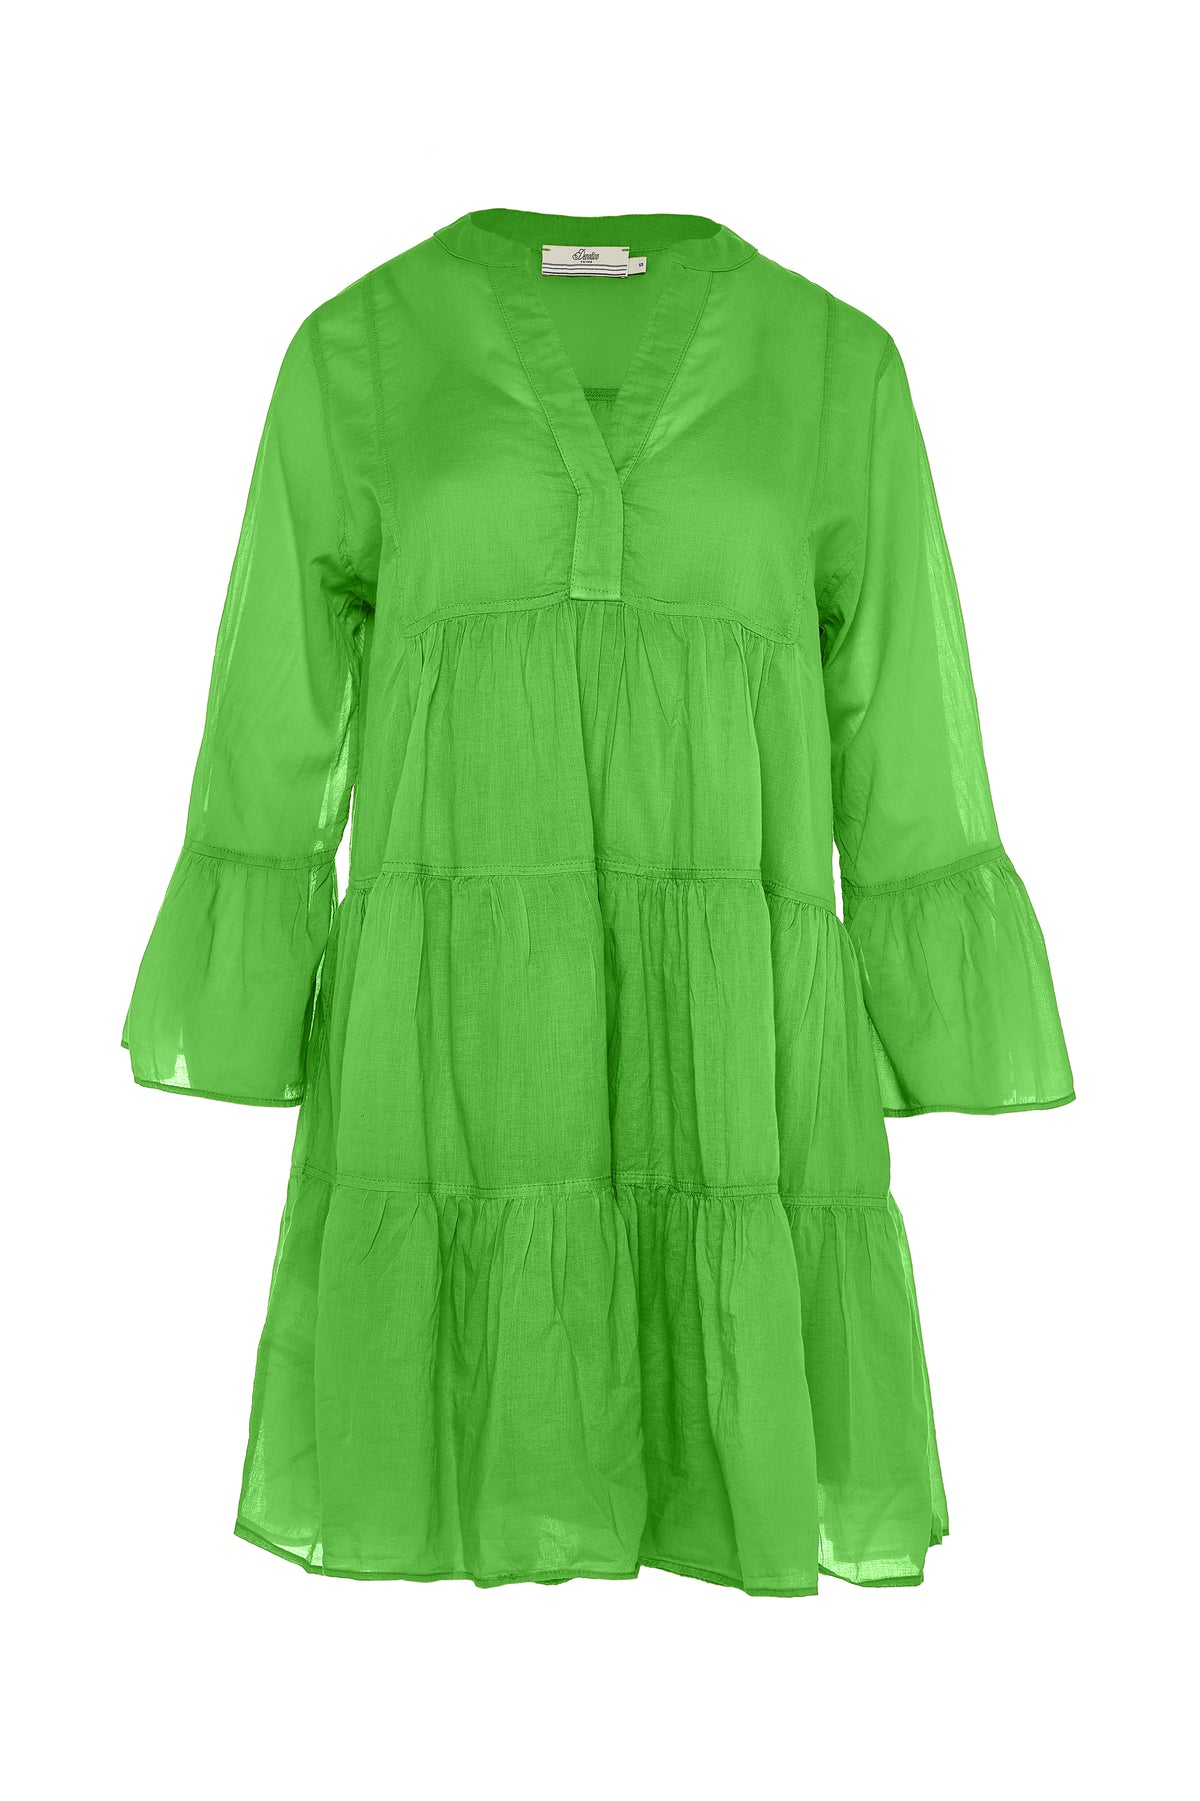 Green knee length lightweight beach dress with long fluted sleeves and tiered skirt with notch neckline